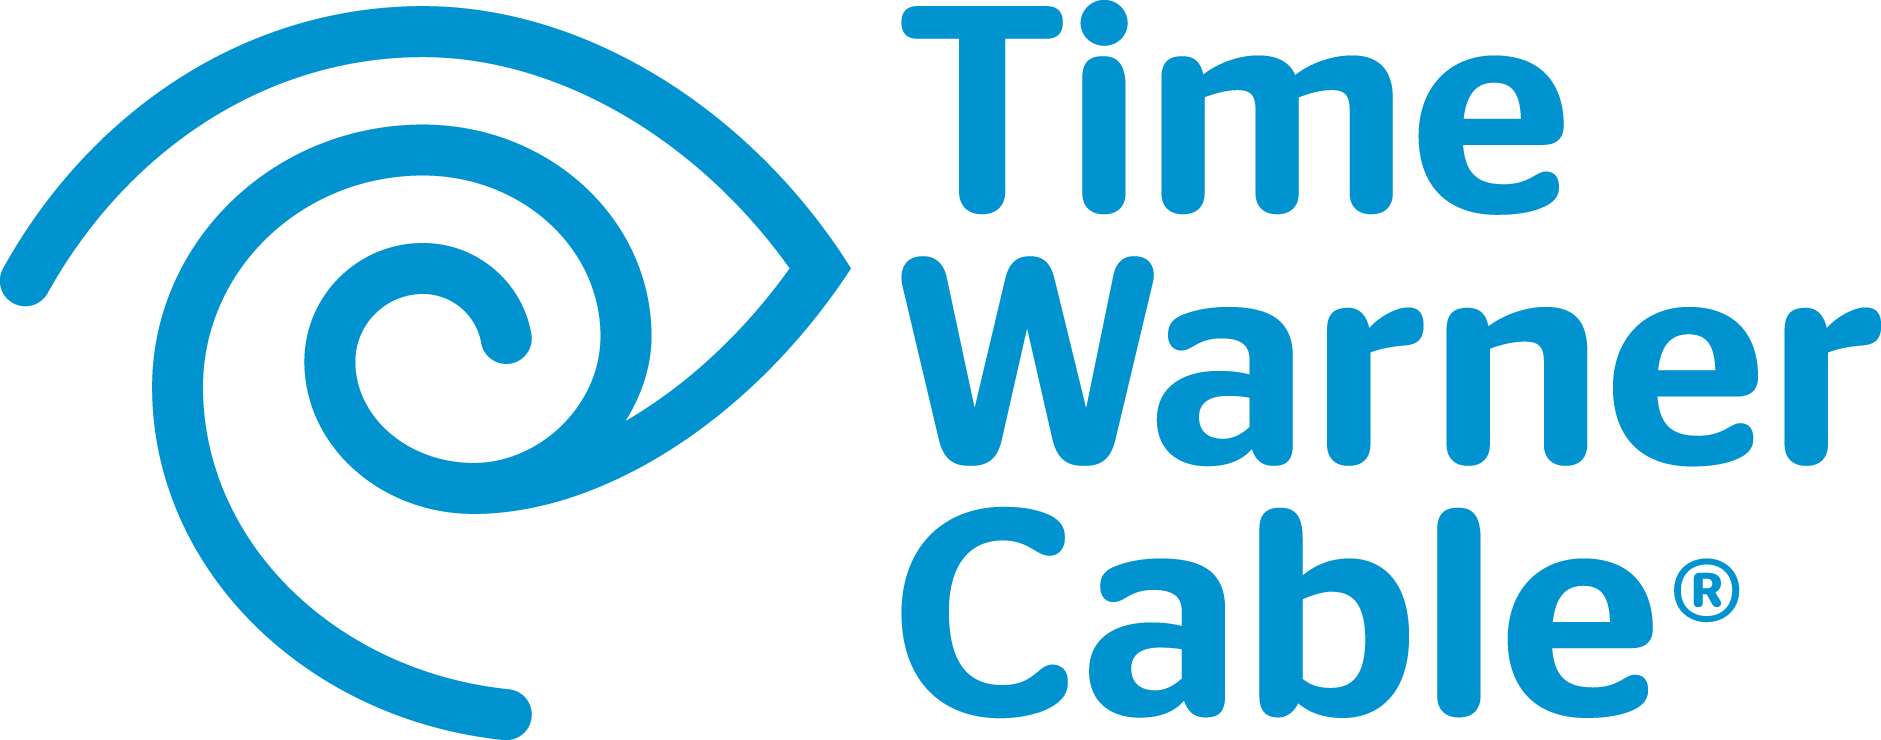 time_warner_cable.png